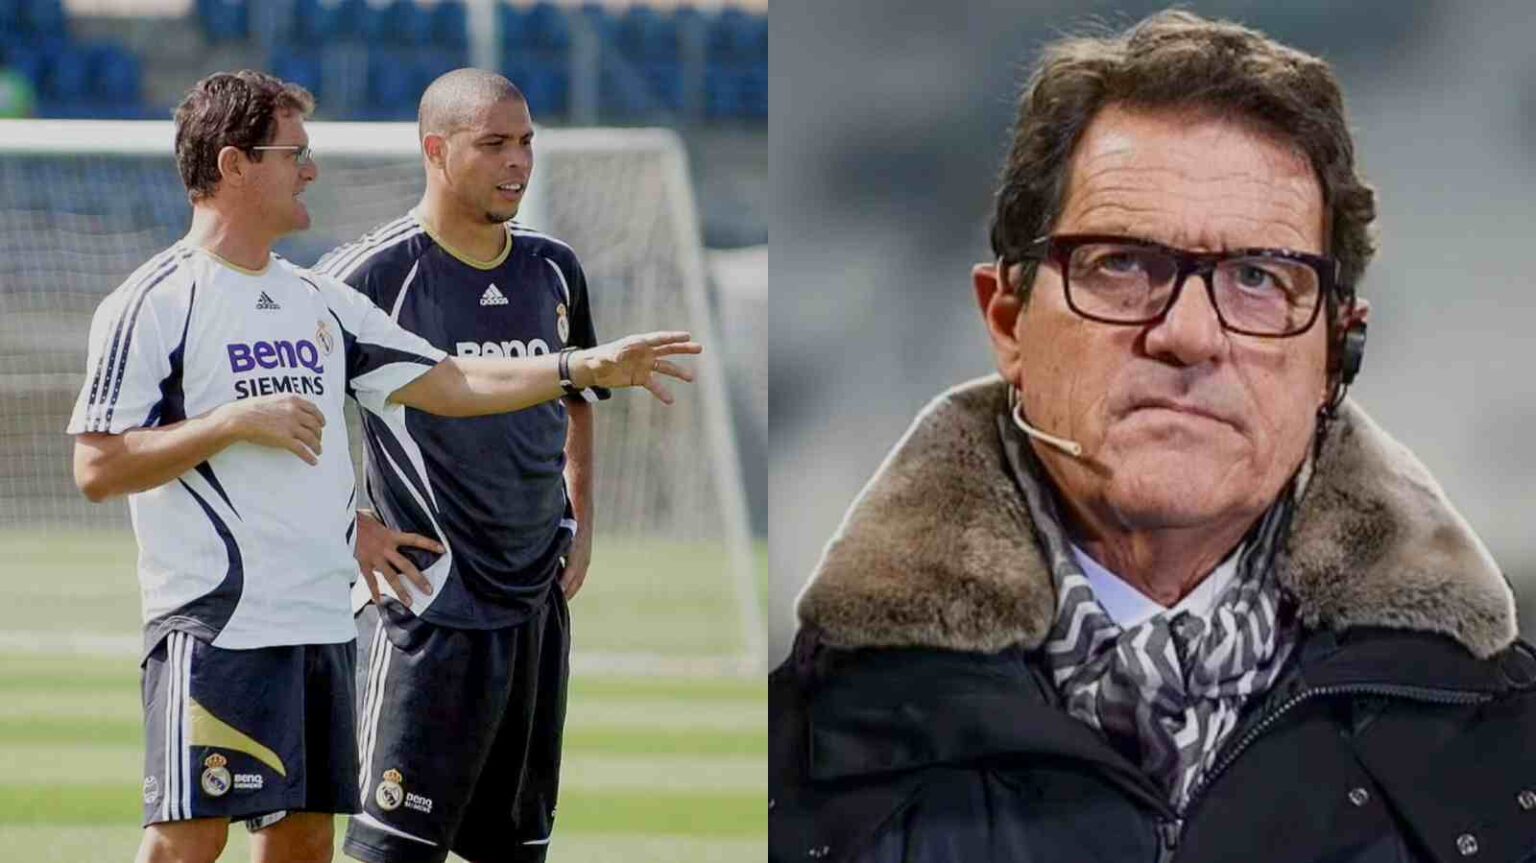 'He was fond of parties and women': Former Madrid Coach Fabio Capello reveals he's 'proud' he sold Ronaldo as his departure created a competitive atmosphere